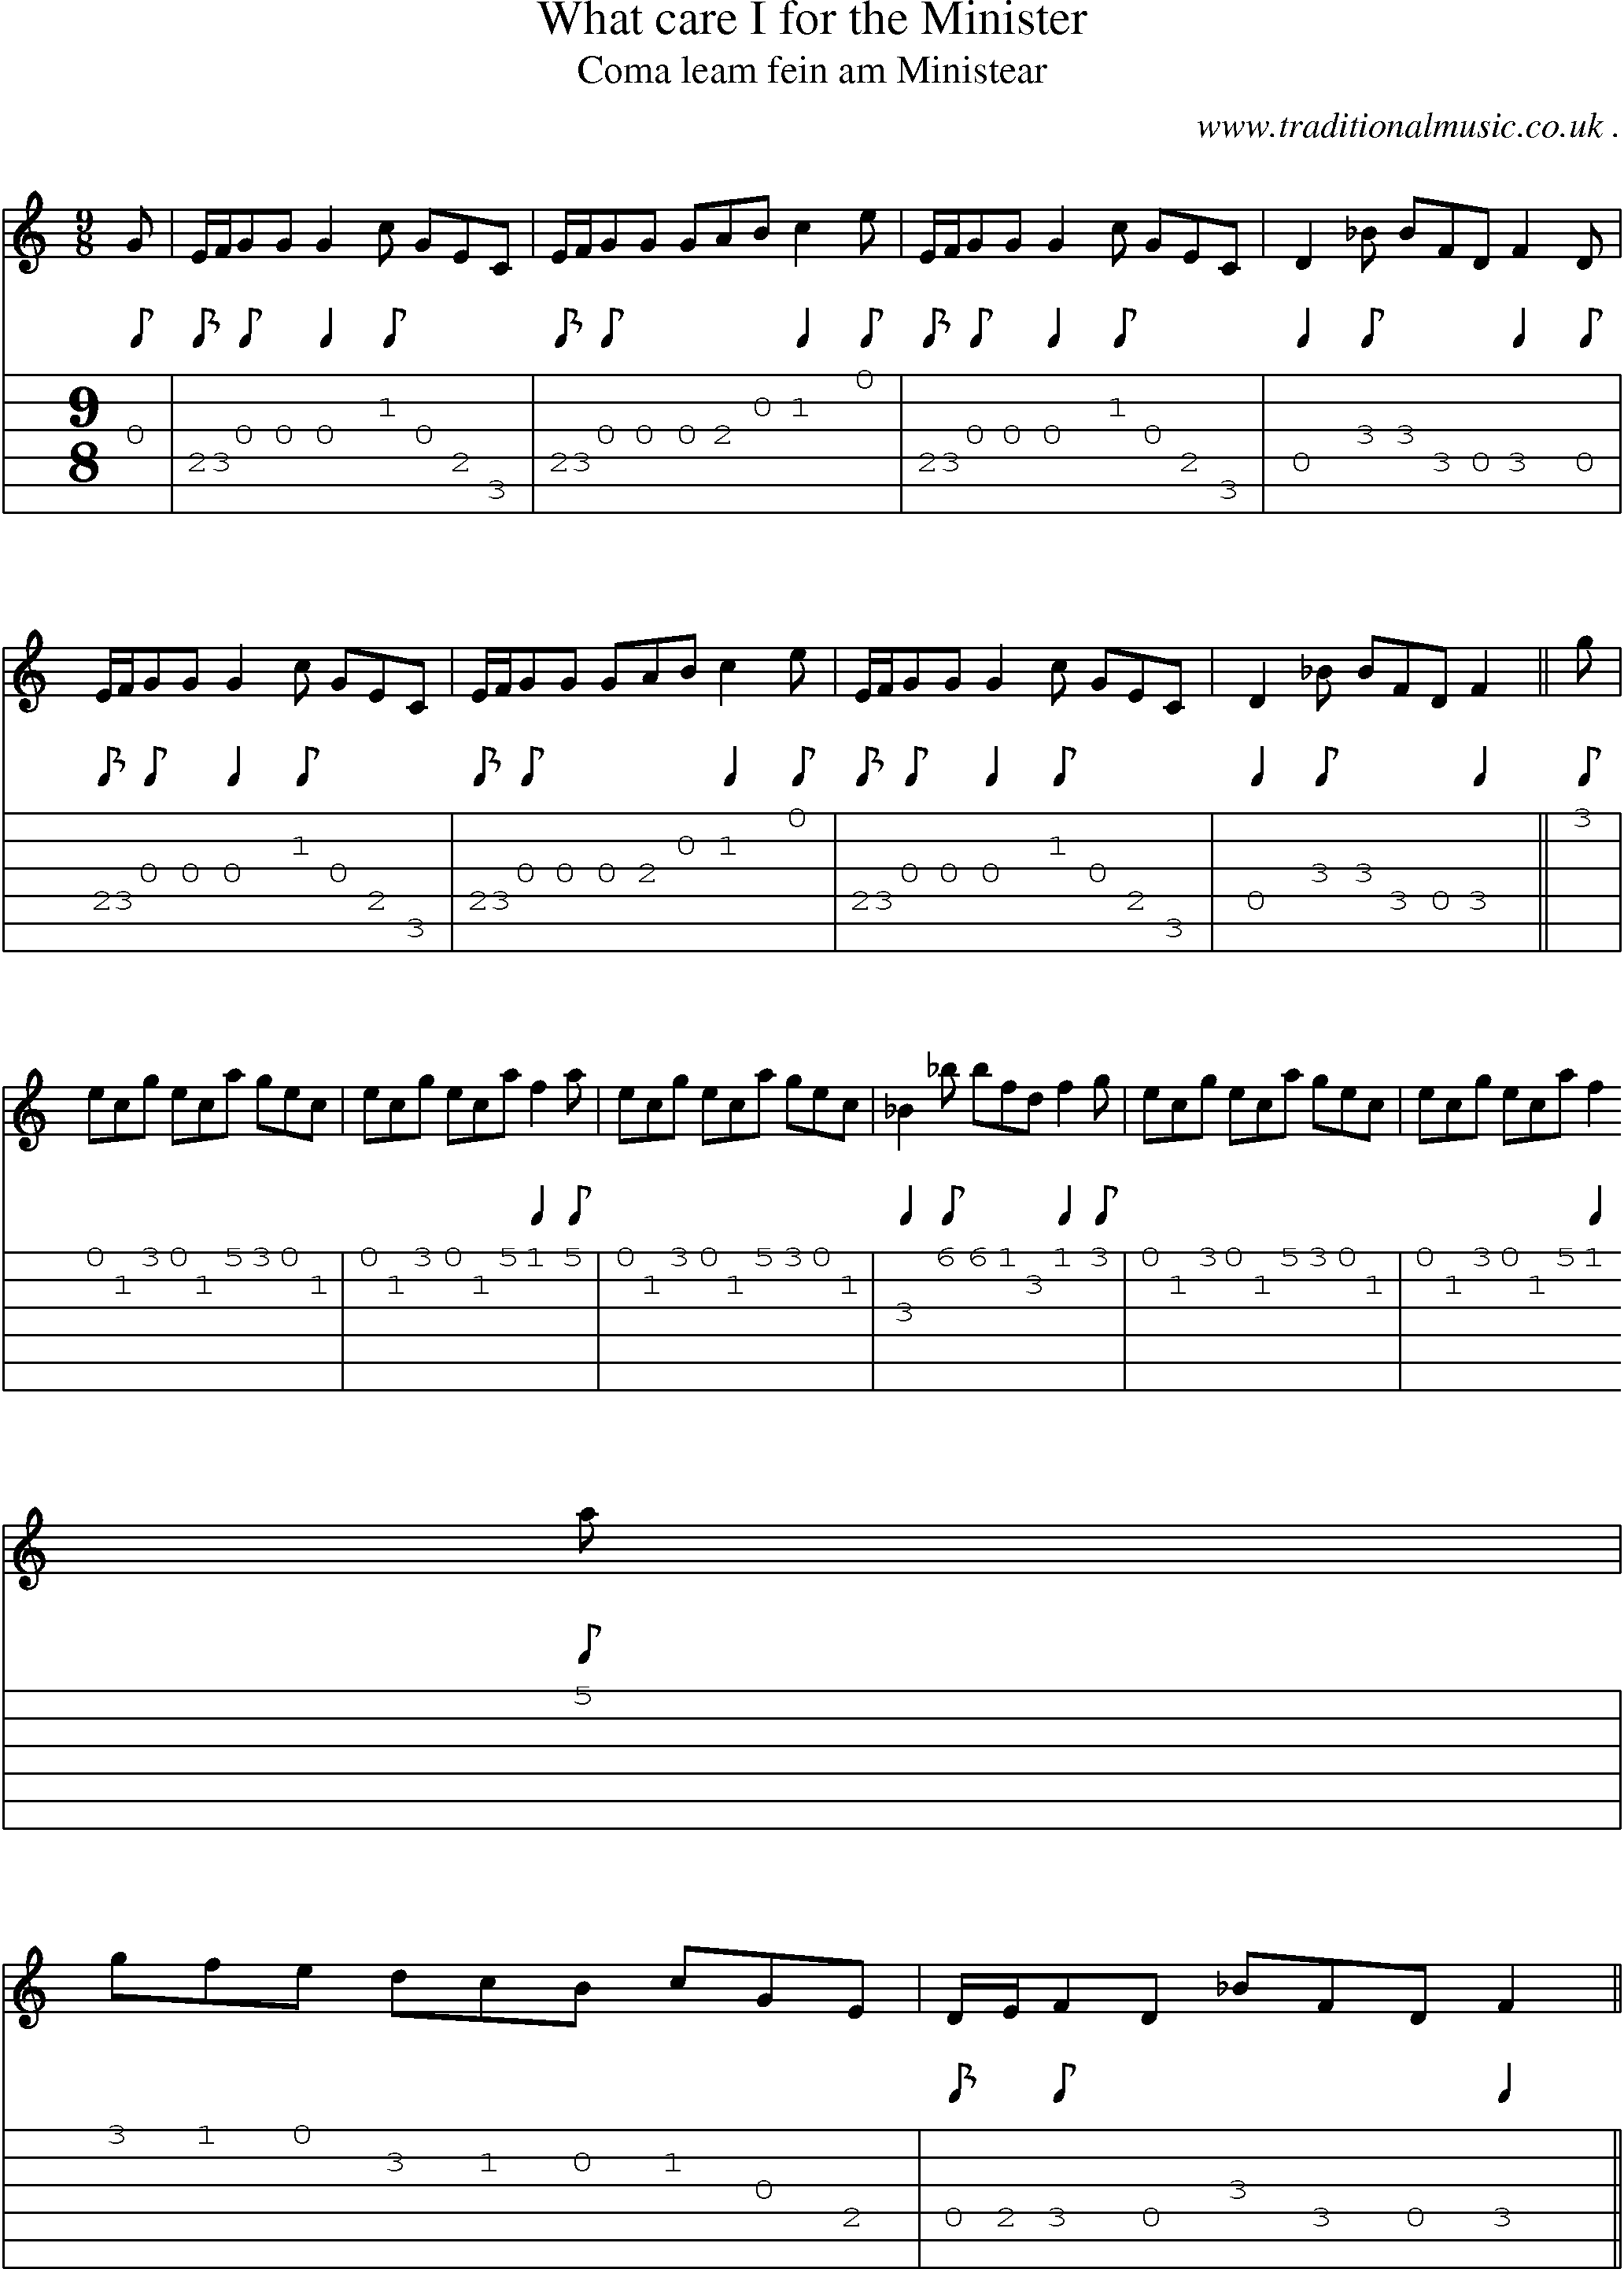 Sheet-music  score, Chords and Guitar Tabs for What Care I For The Minister